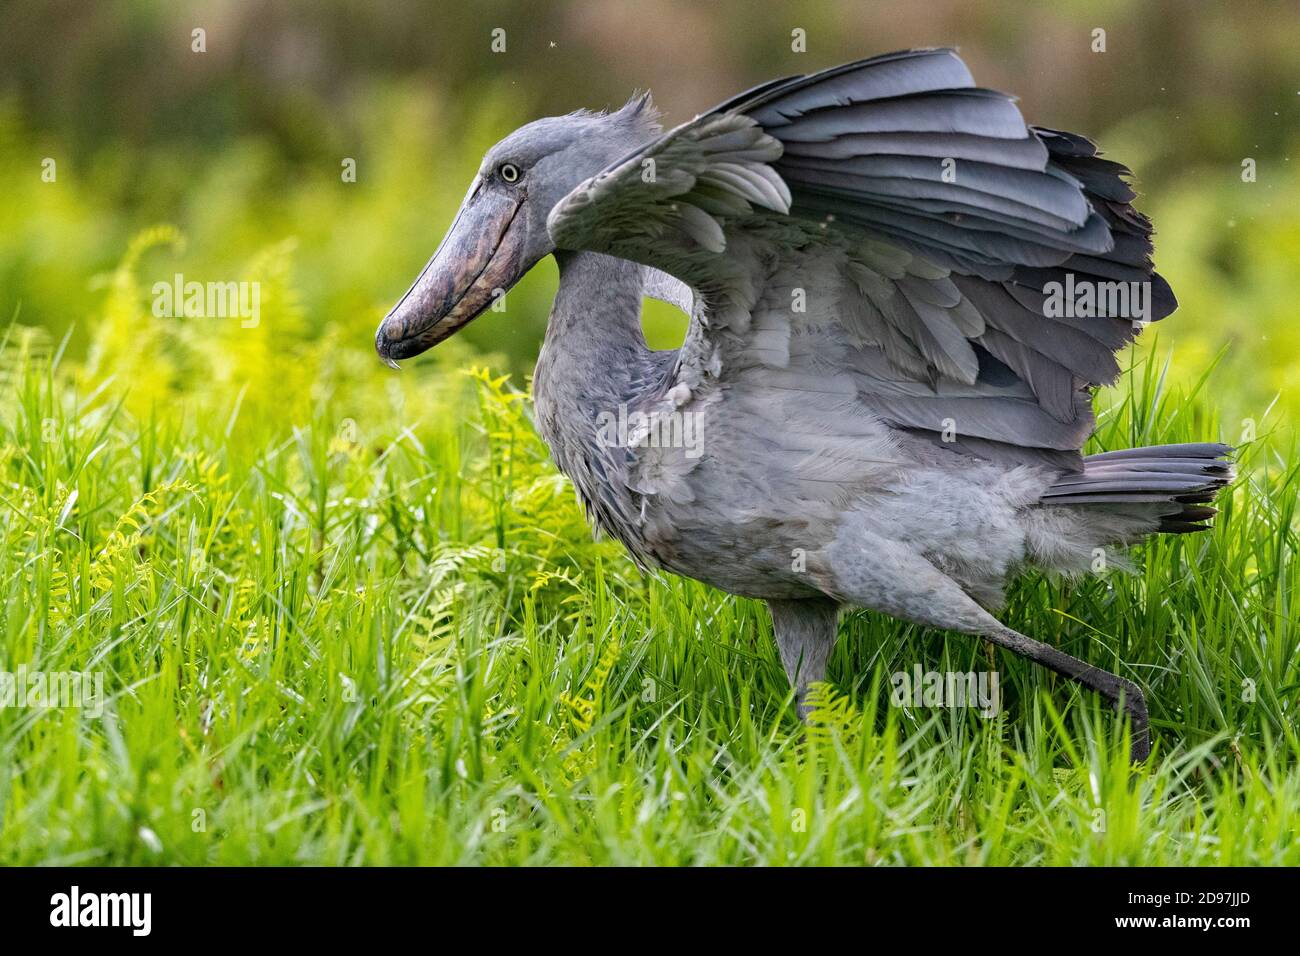 Shoebill (Balaeniceps rex), hunting for dipneuste (protoptera = pulmonary bony fish that bury themselves in the mud when water runs out, Mabamba swamp Stock Photo